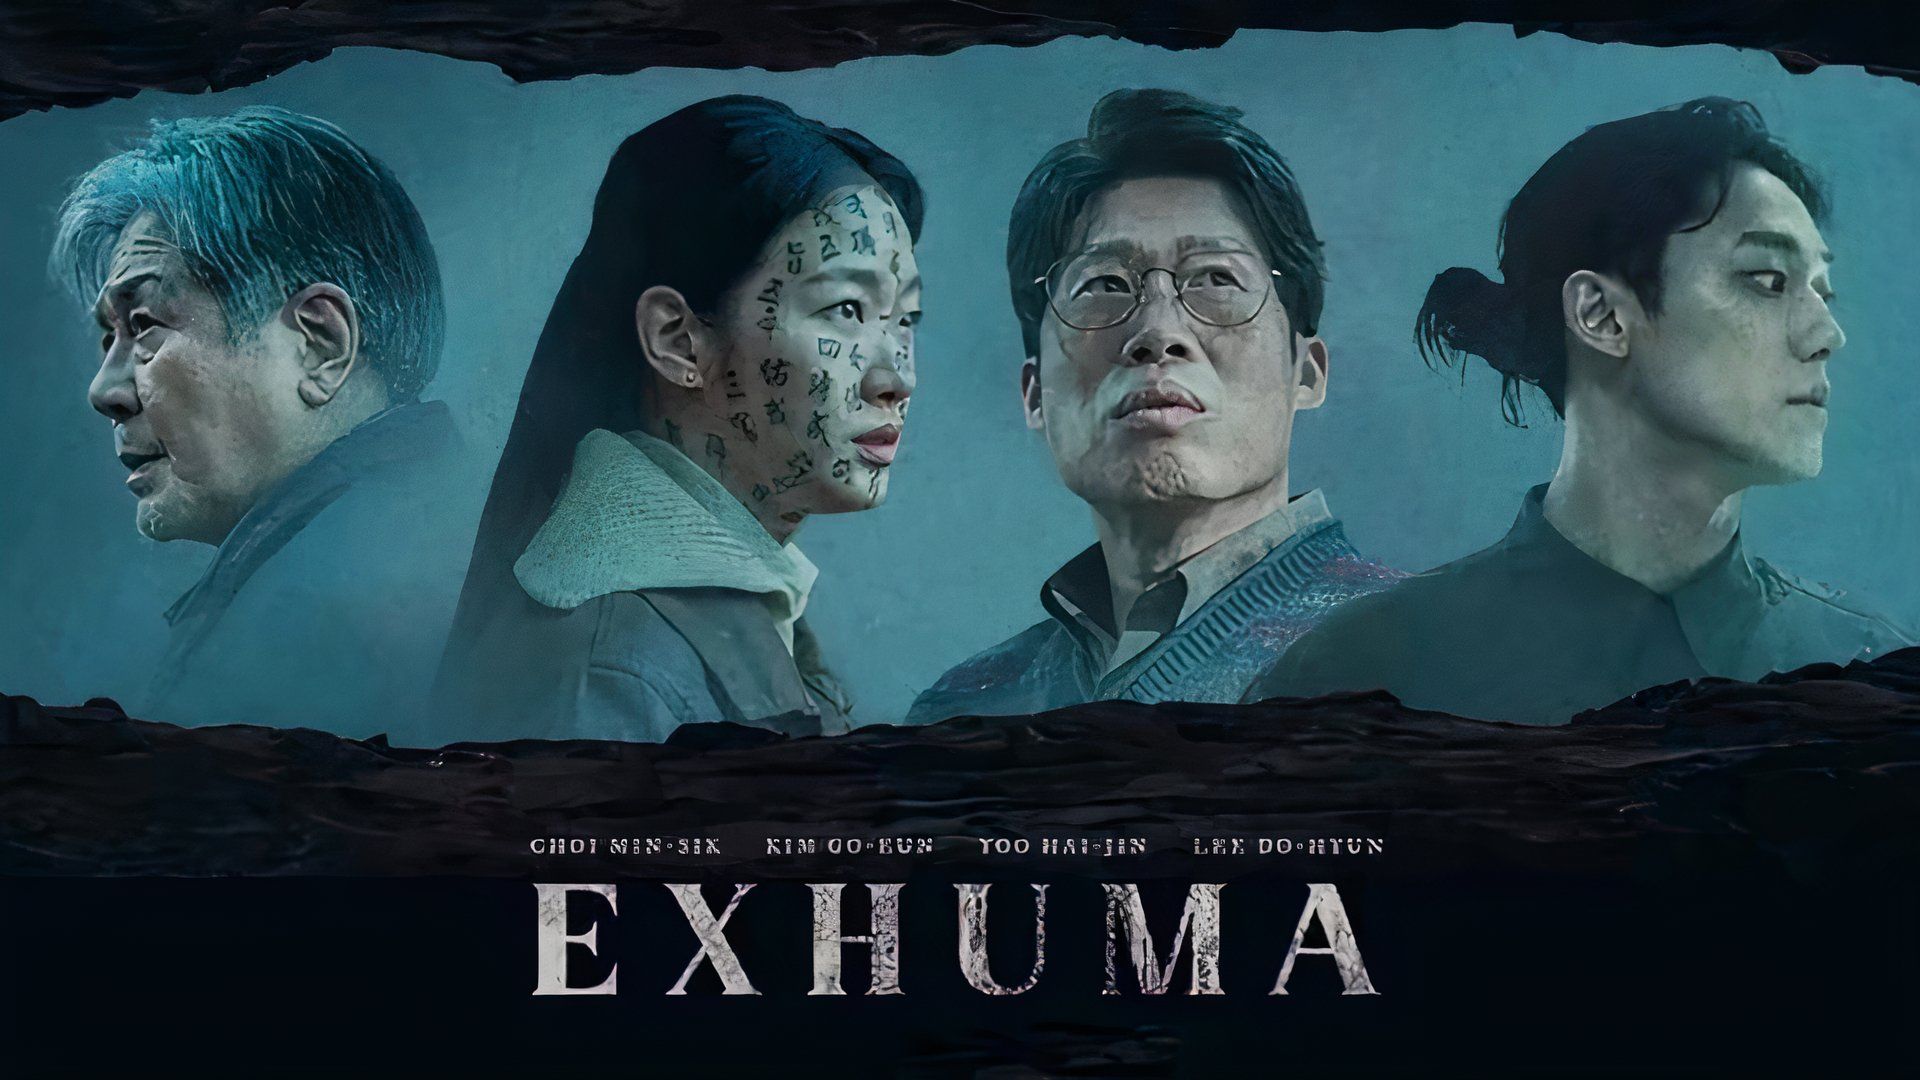 The cast of Exhuma looking in different directions off-screen in the poster